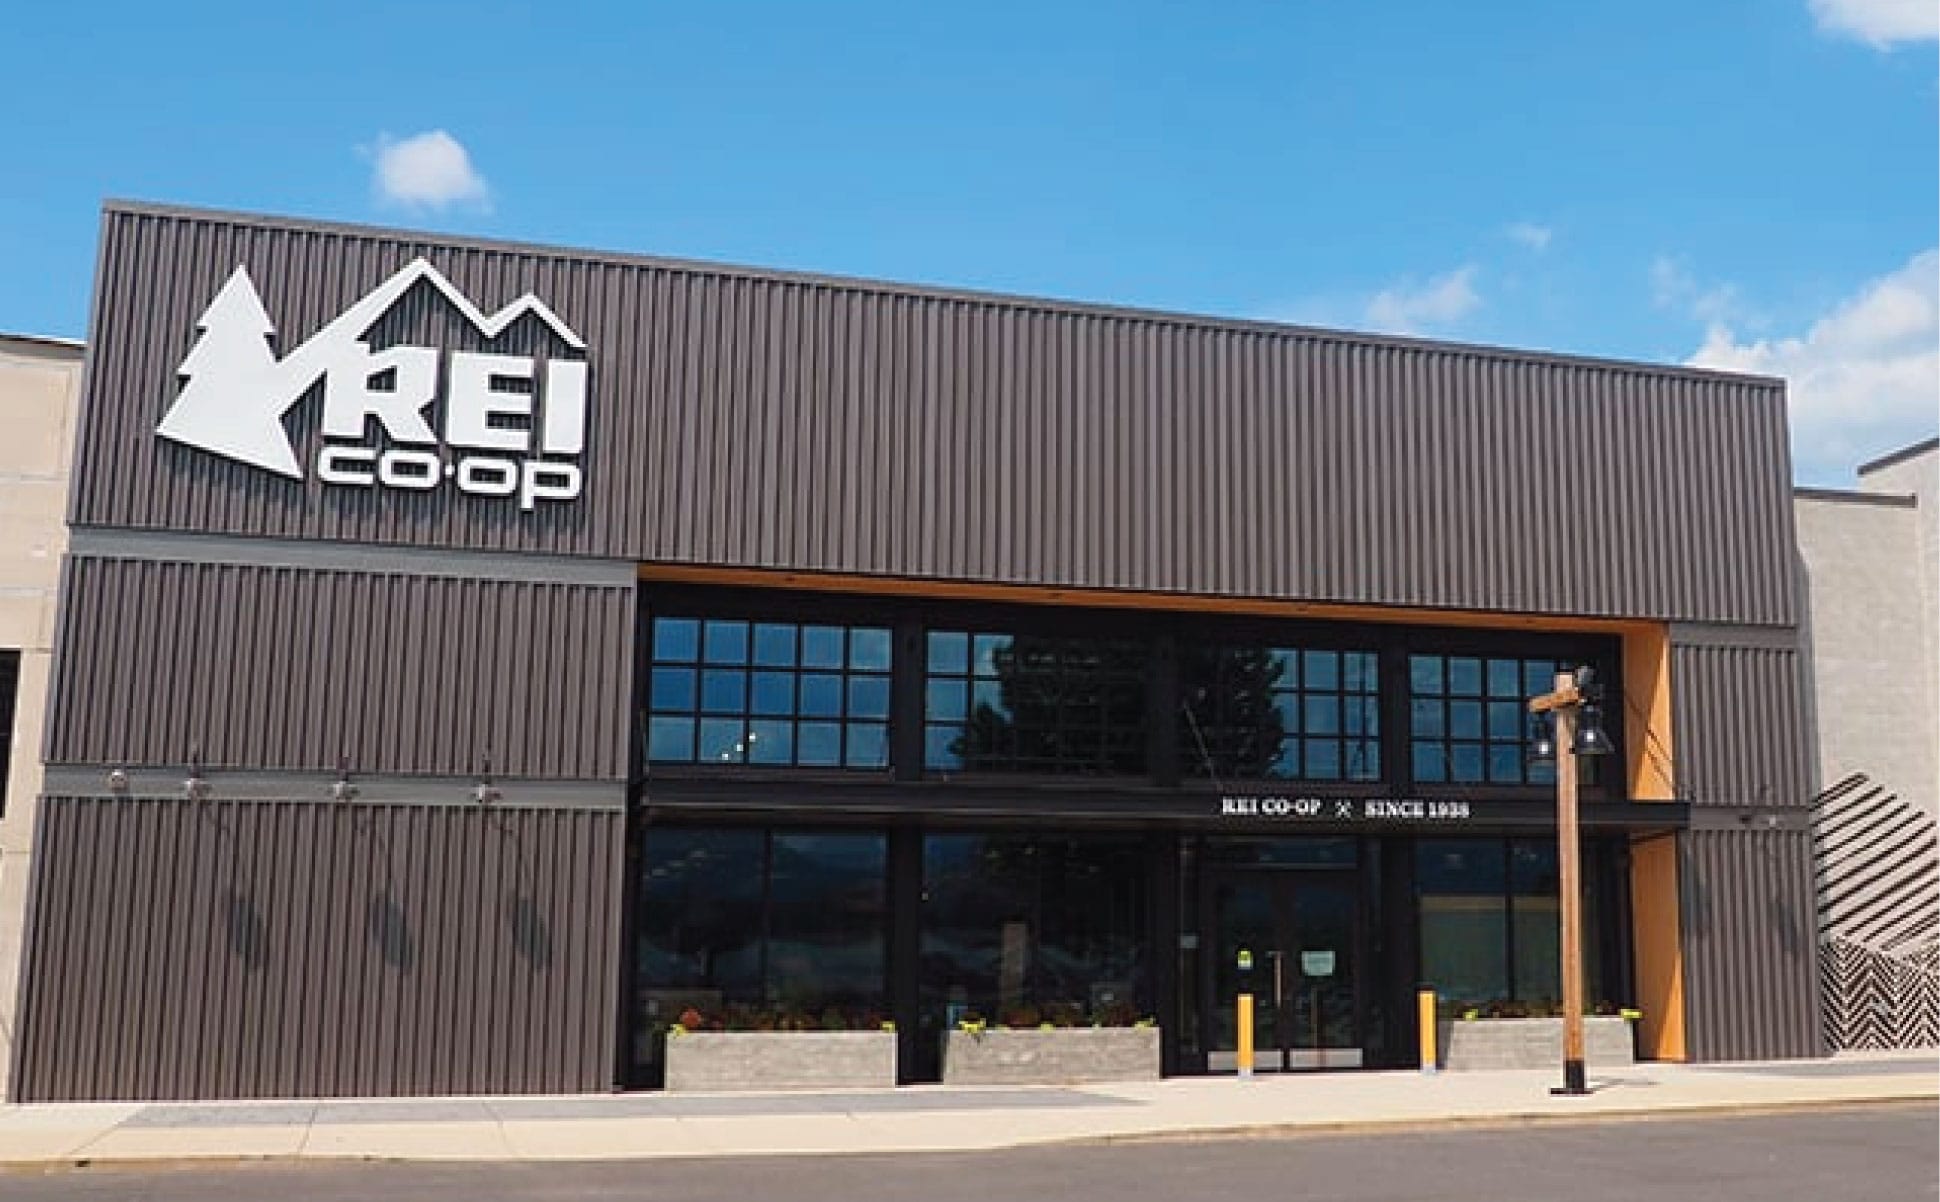 REI Co-op - Sports & Outdoors Shopping in Pigeon Forge, TN